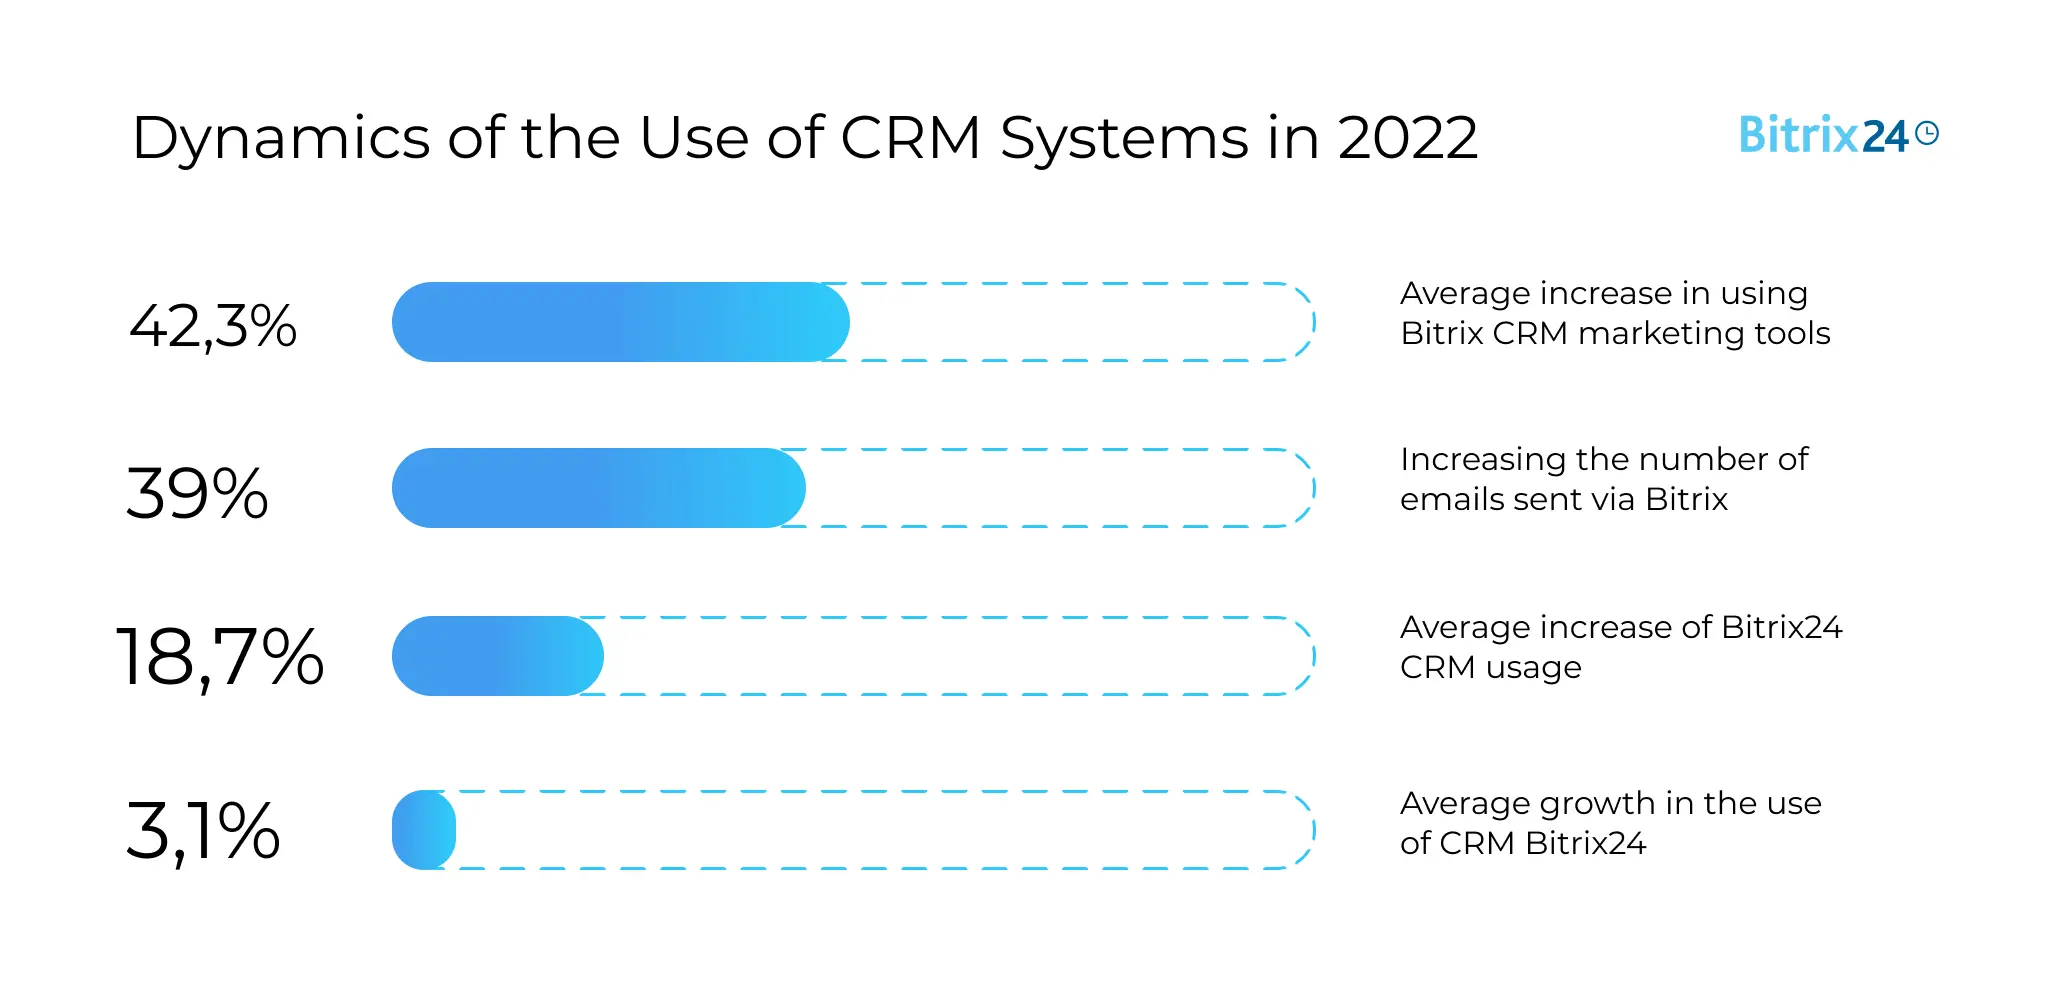 Dynamics of the USE of CRM Systems in 2022